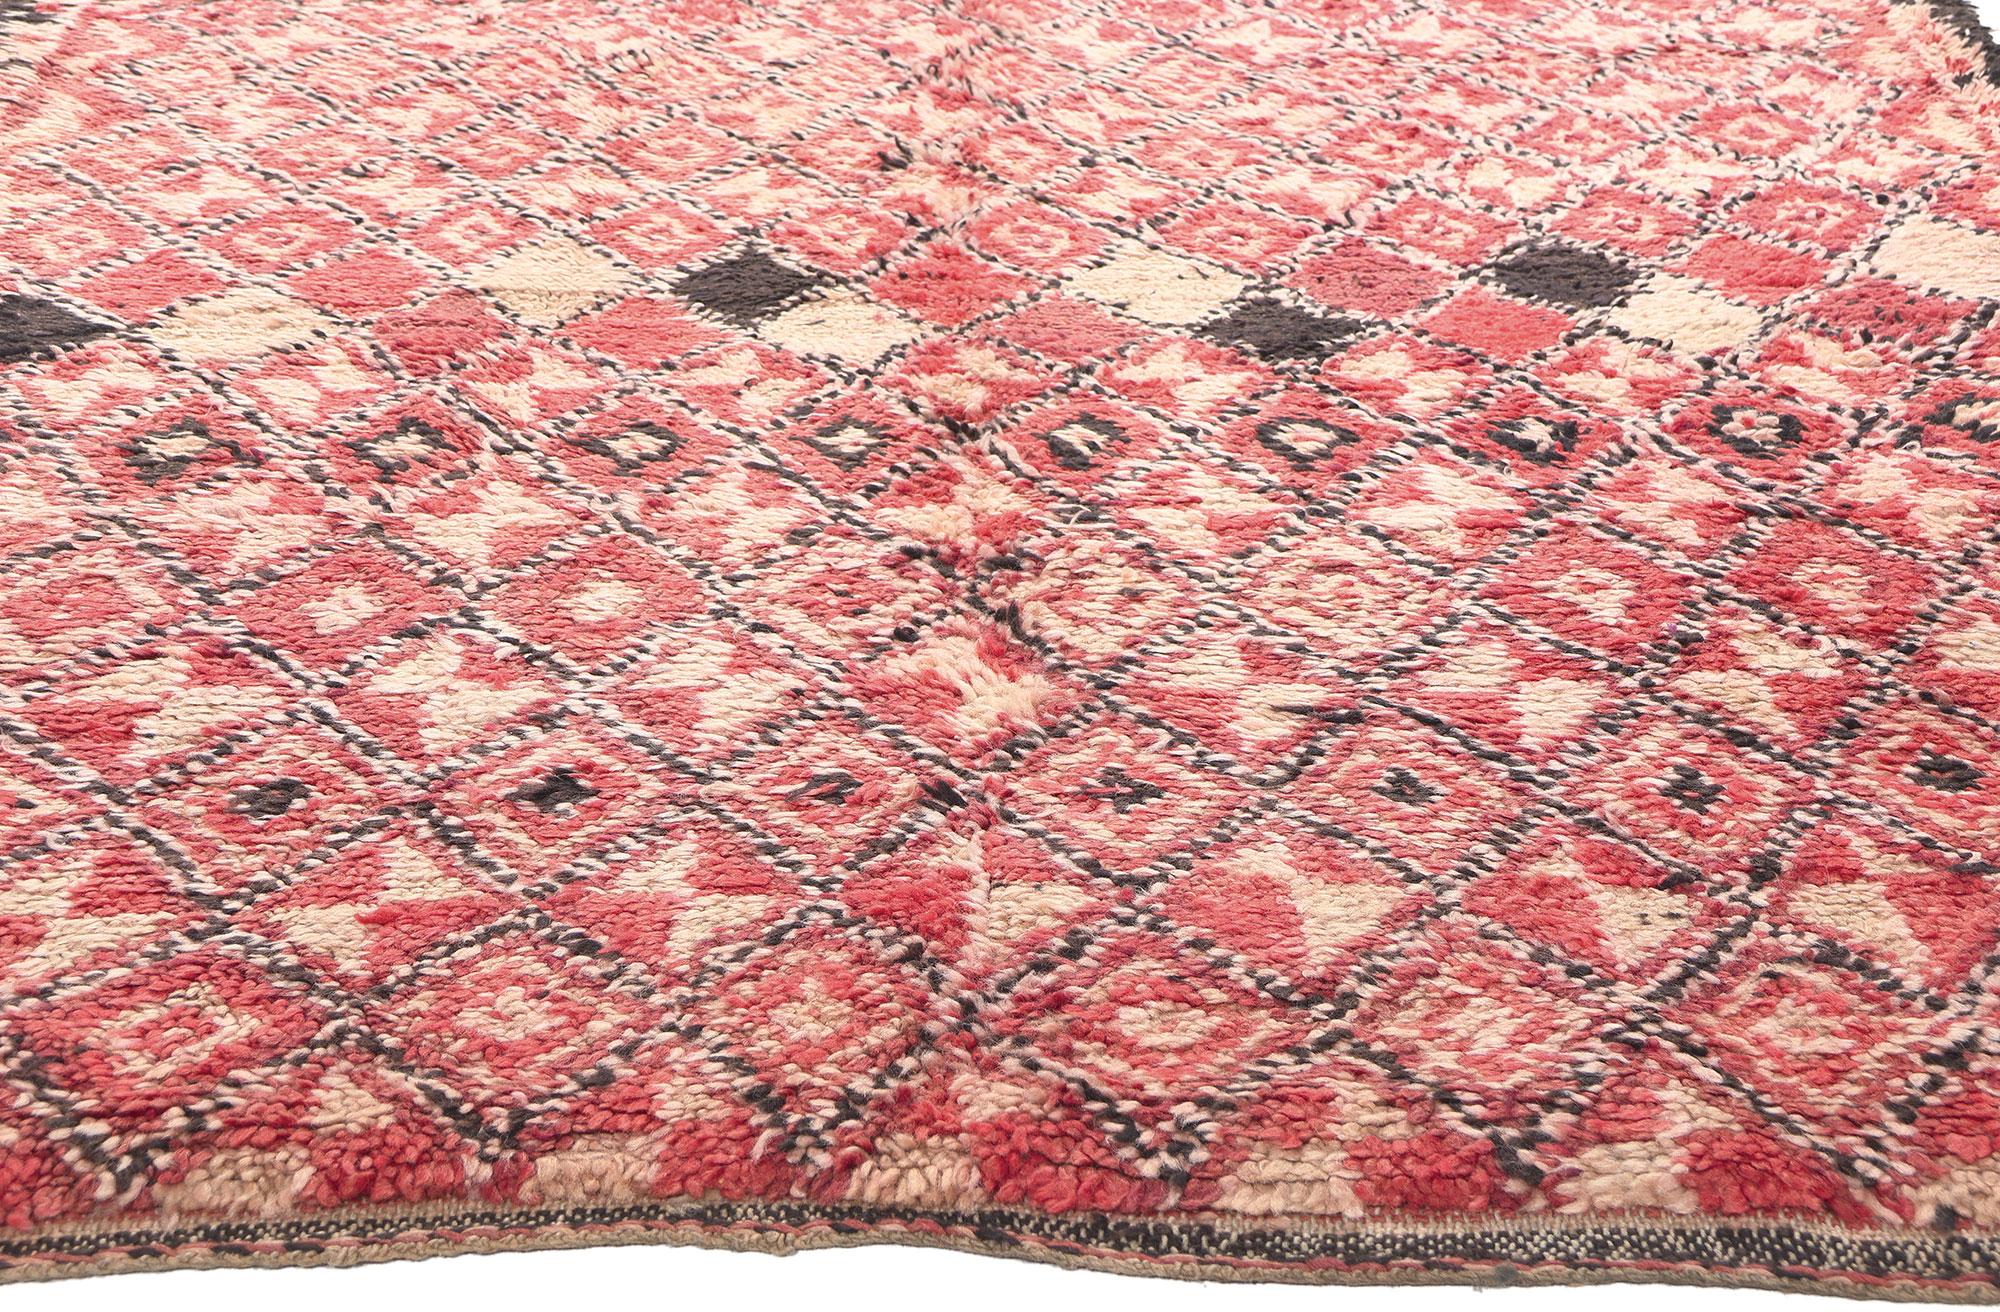 Hand-Knotted Vintage Beni MGuild Moroccan Rug, Nomadic Charm Meets Midcentury For Sale